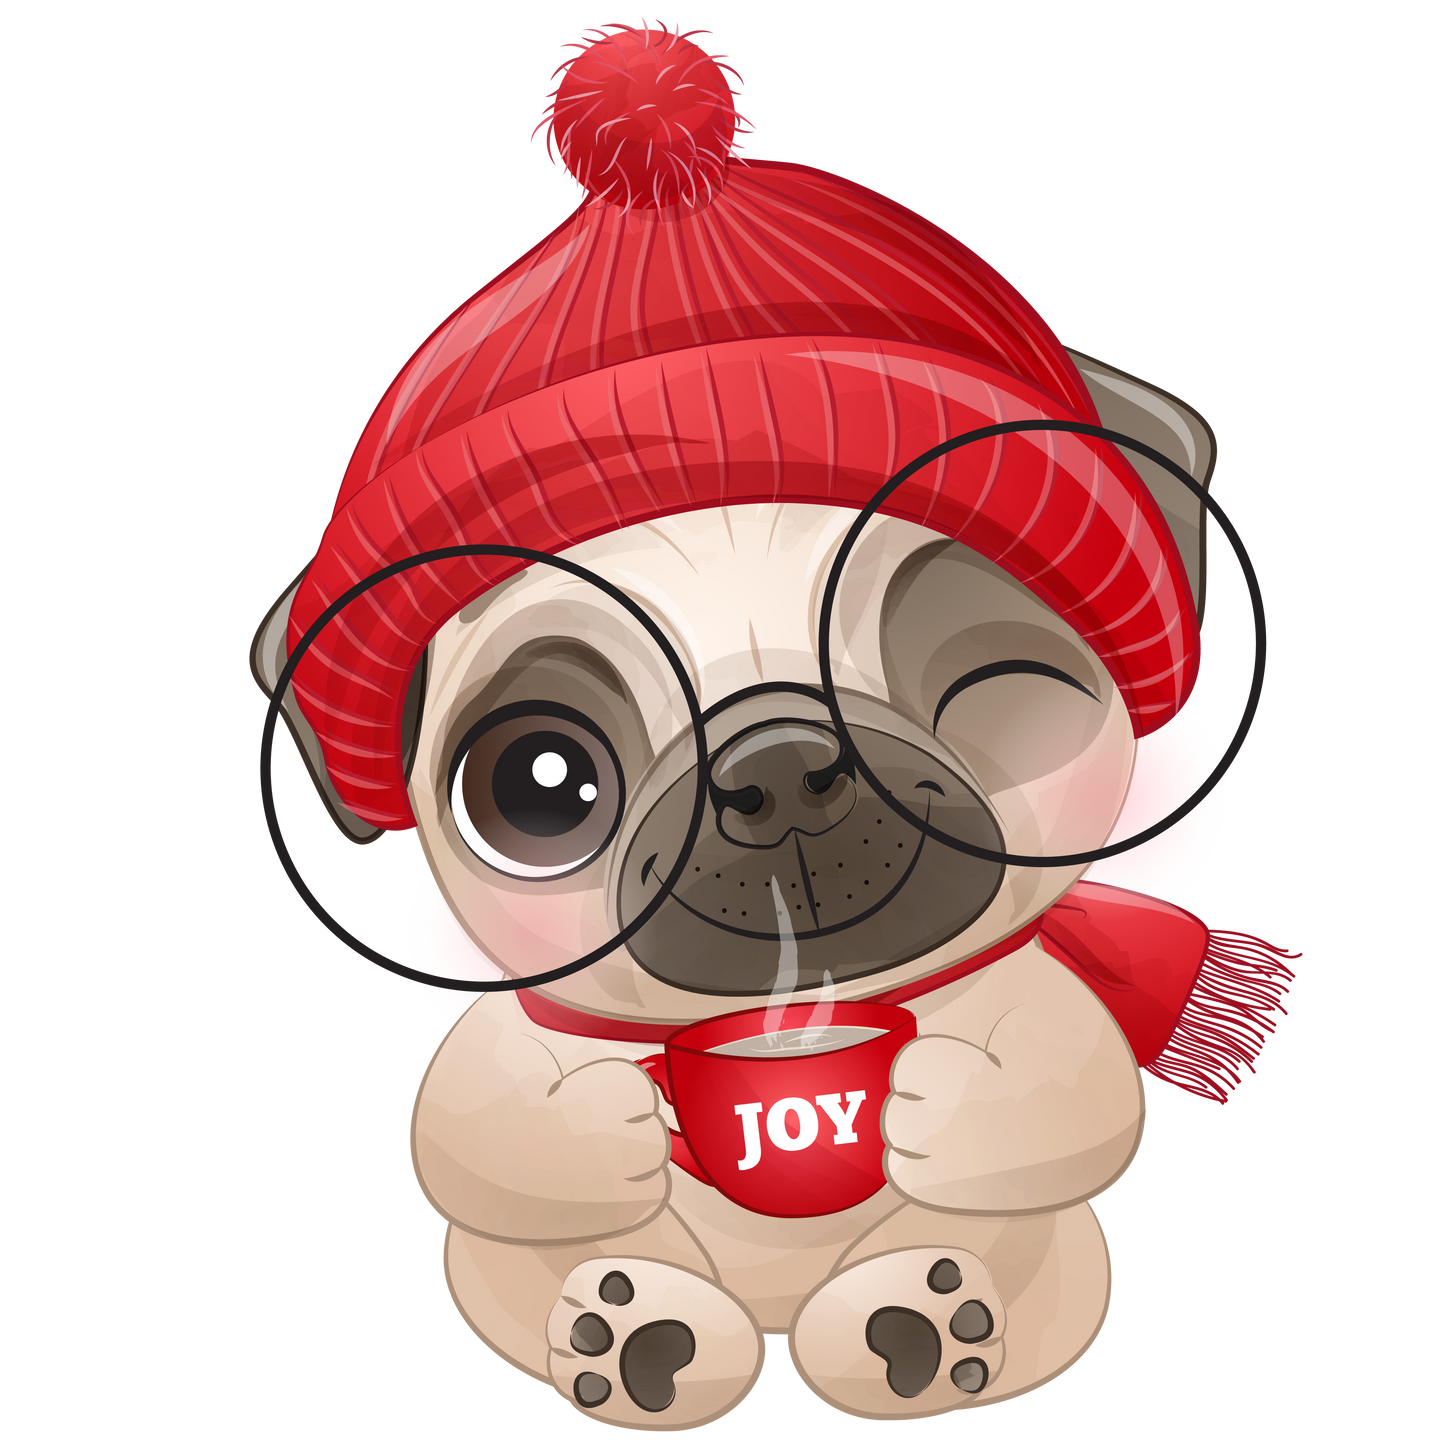 Sticker - Pug, Adorable Pug with a Cup of Joy